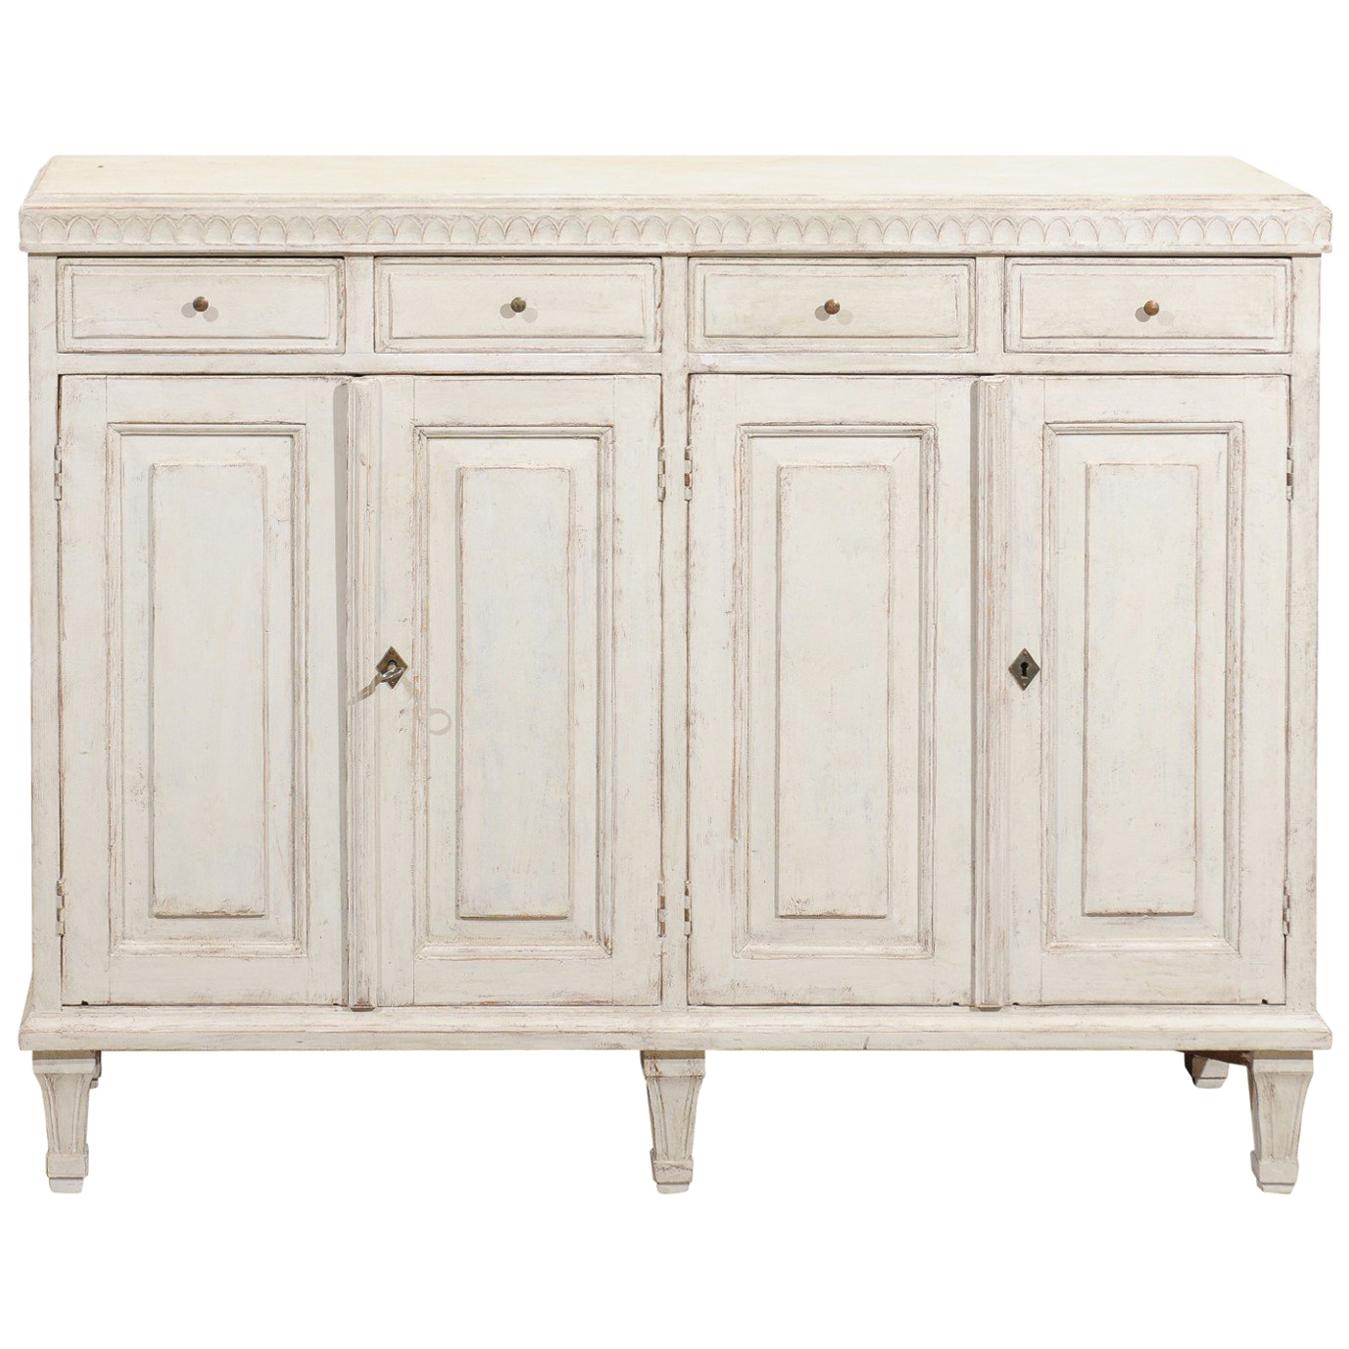 Swedish Gustavian Style 1880s Stockholm Painted Buffet with Drawers and Doors